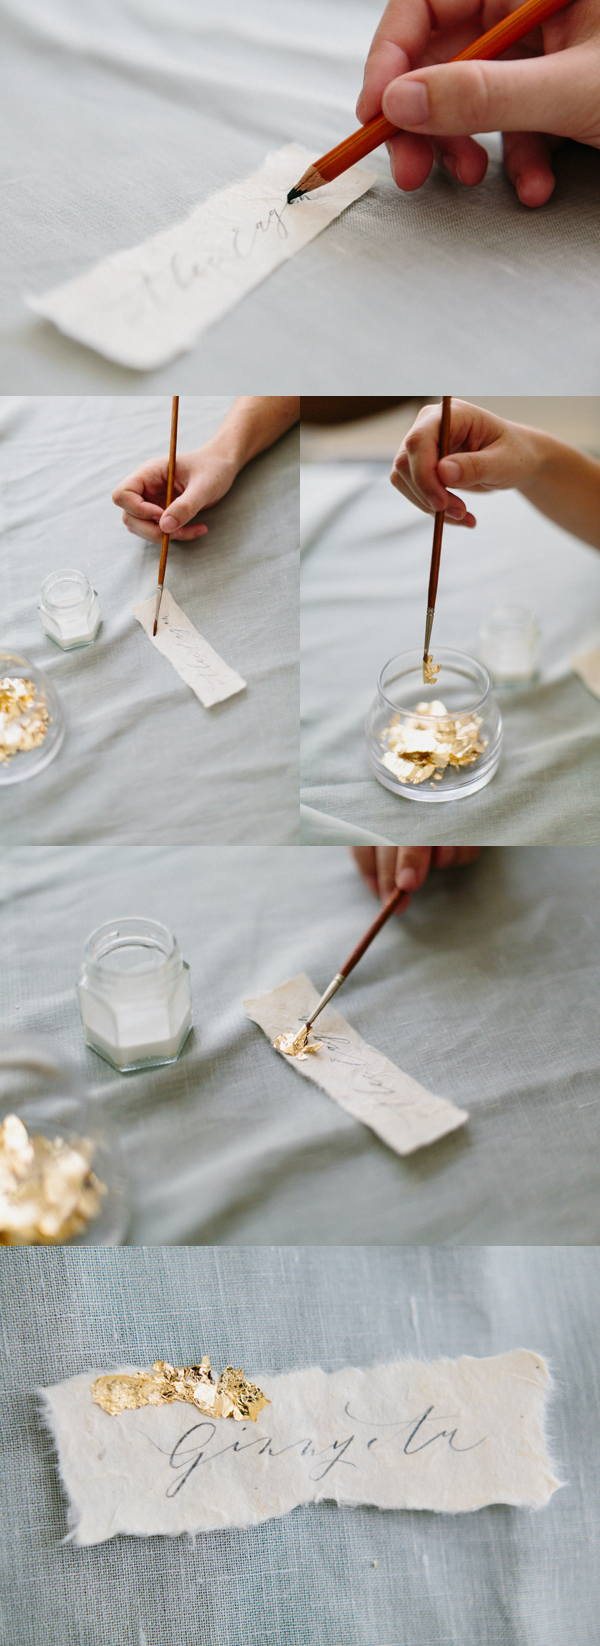 diy-gold-leafing-placecards-tutorial1